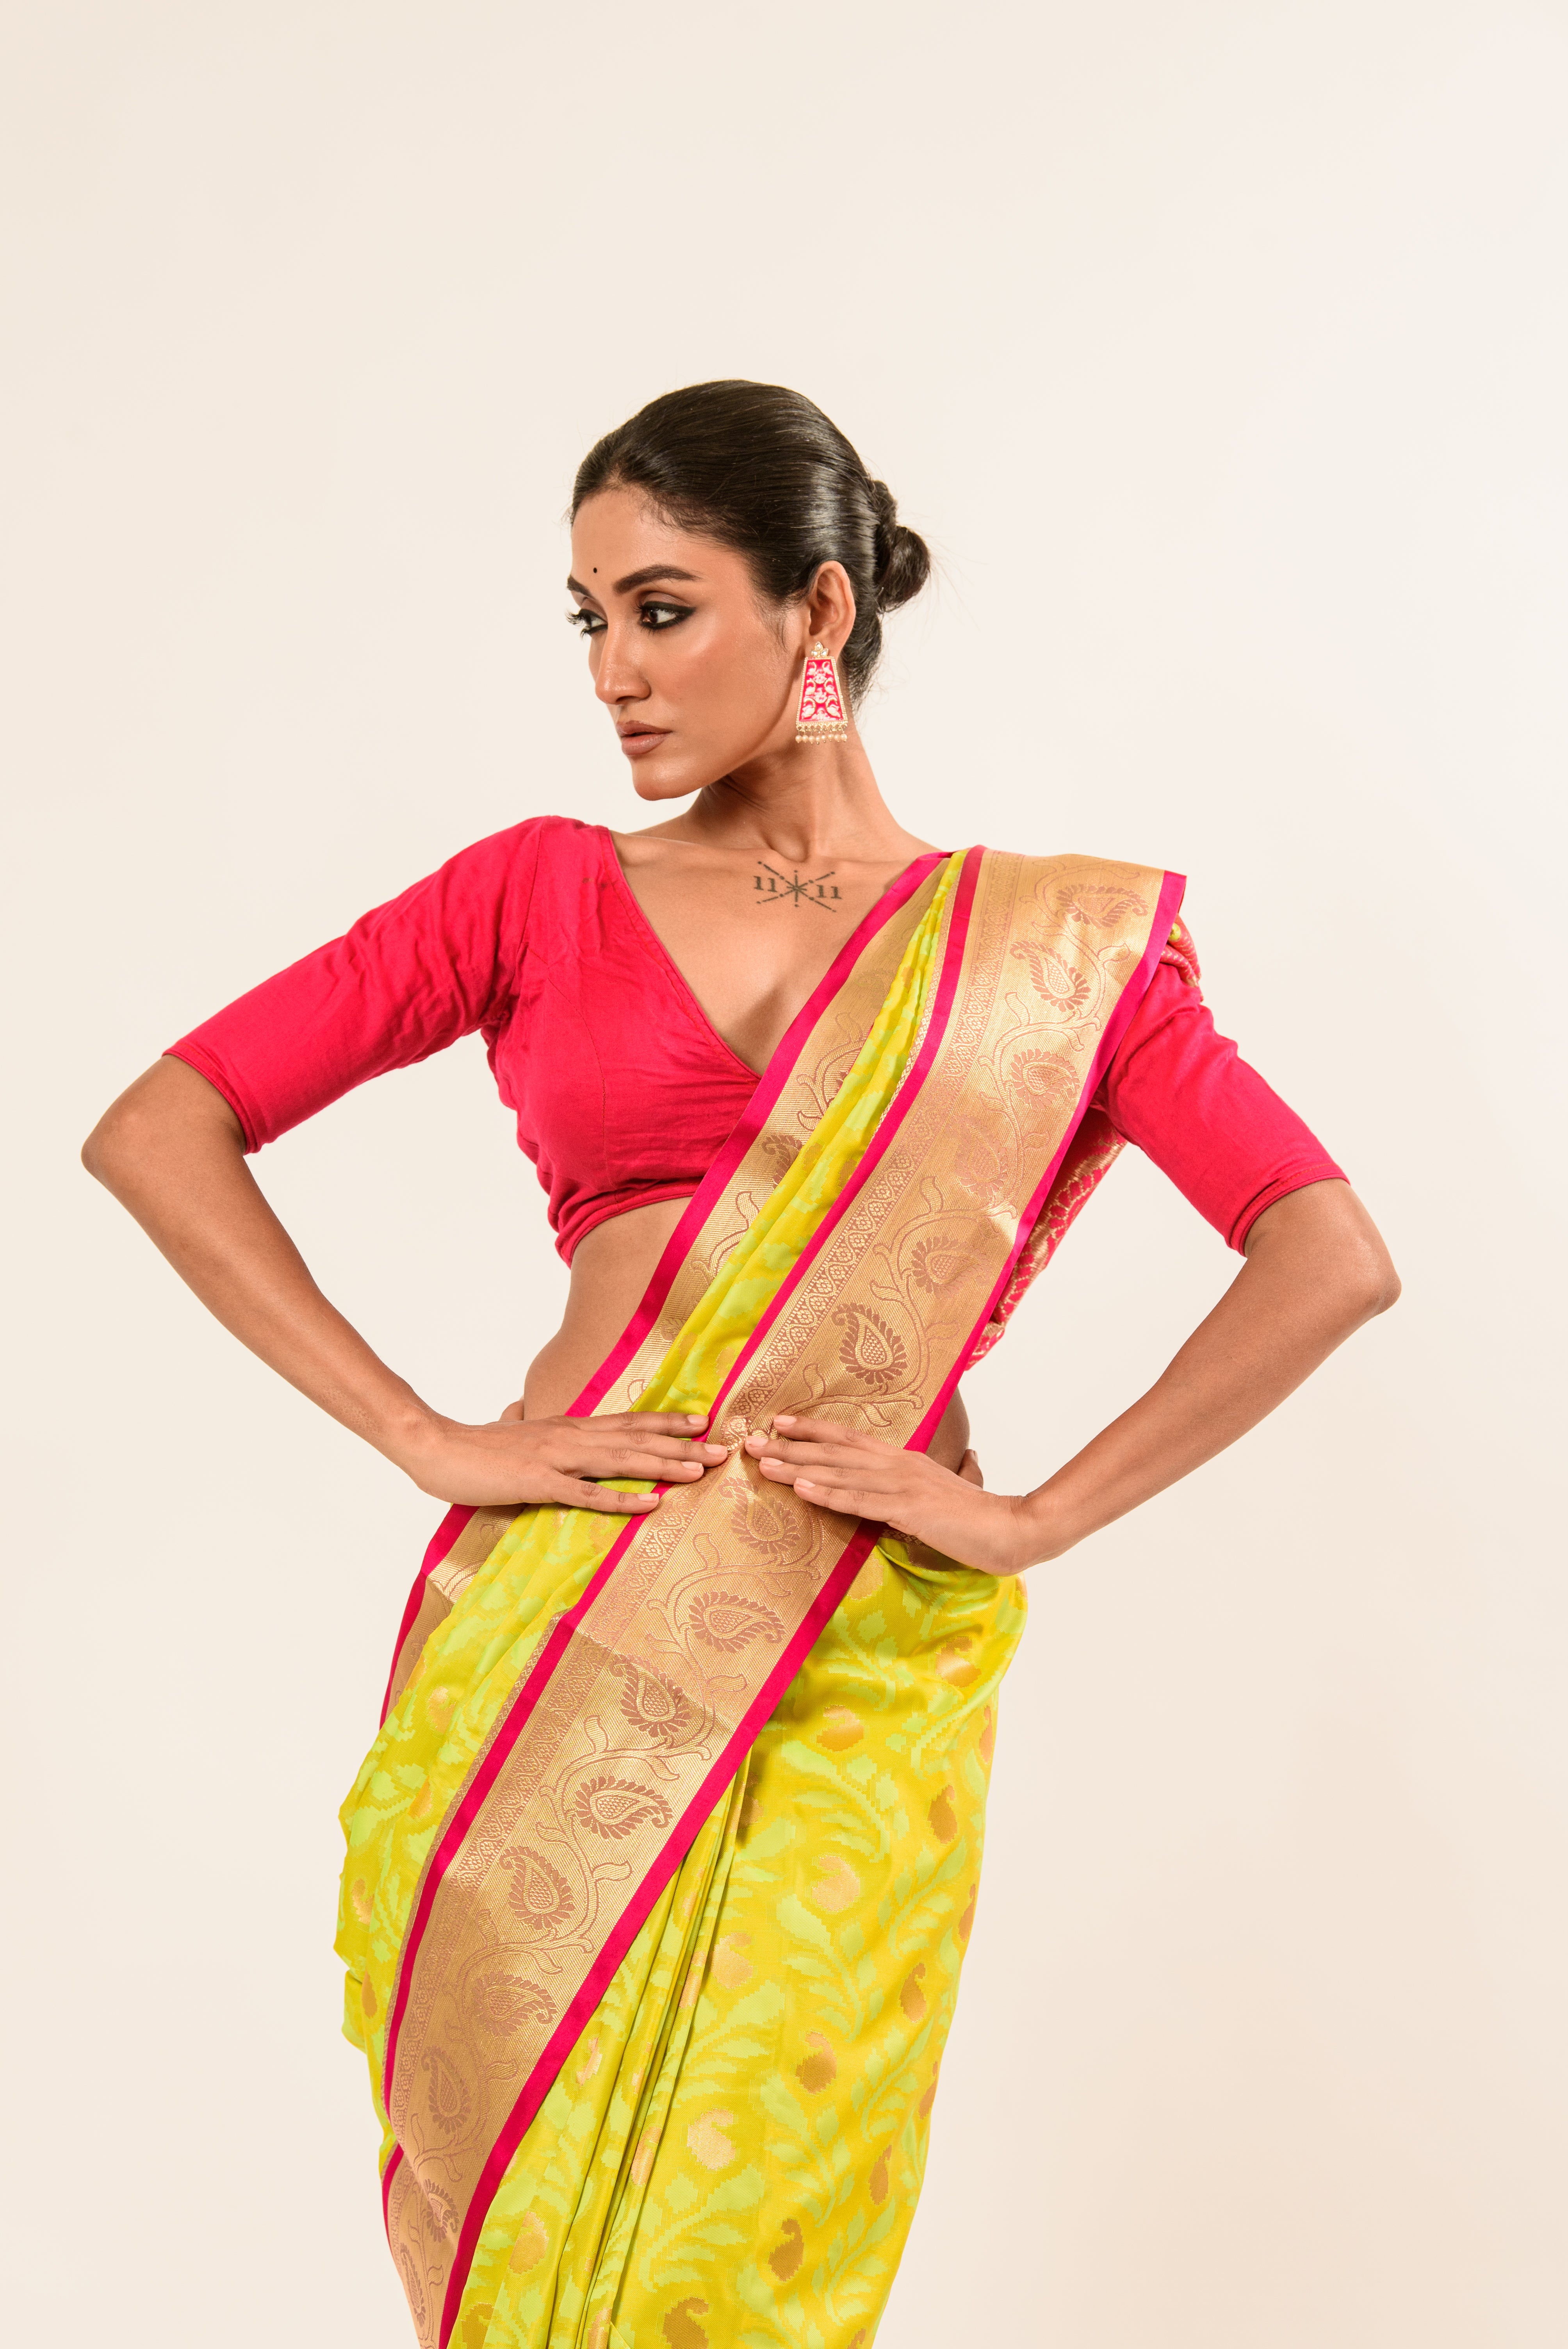 Buy our Floral Lime Green Kanjivaram Pure Silk Saree, perfect blend of traditional and contemporary styles - Anvi Couture.